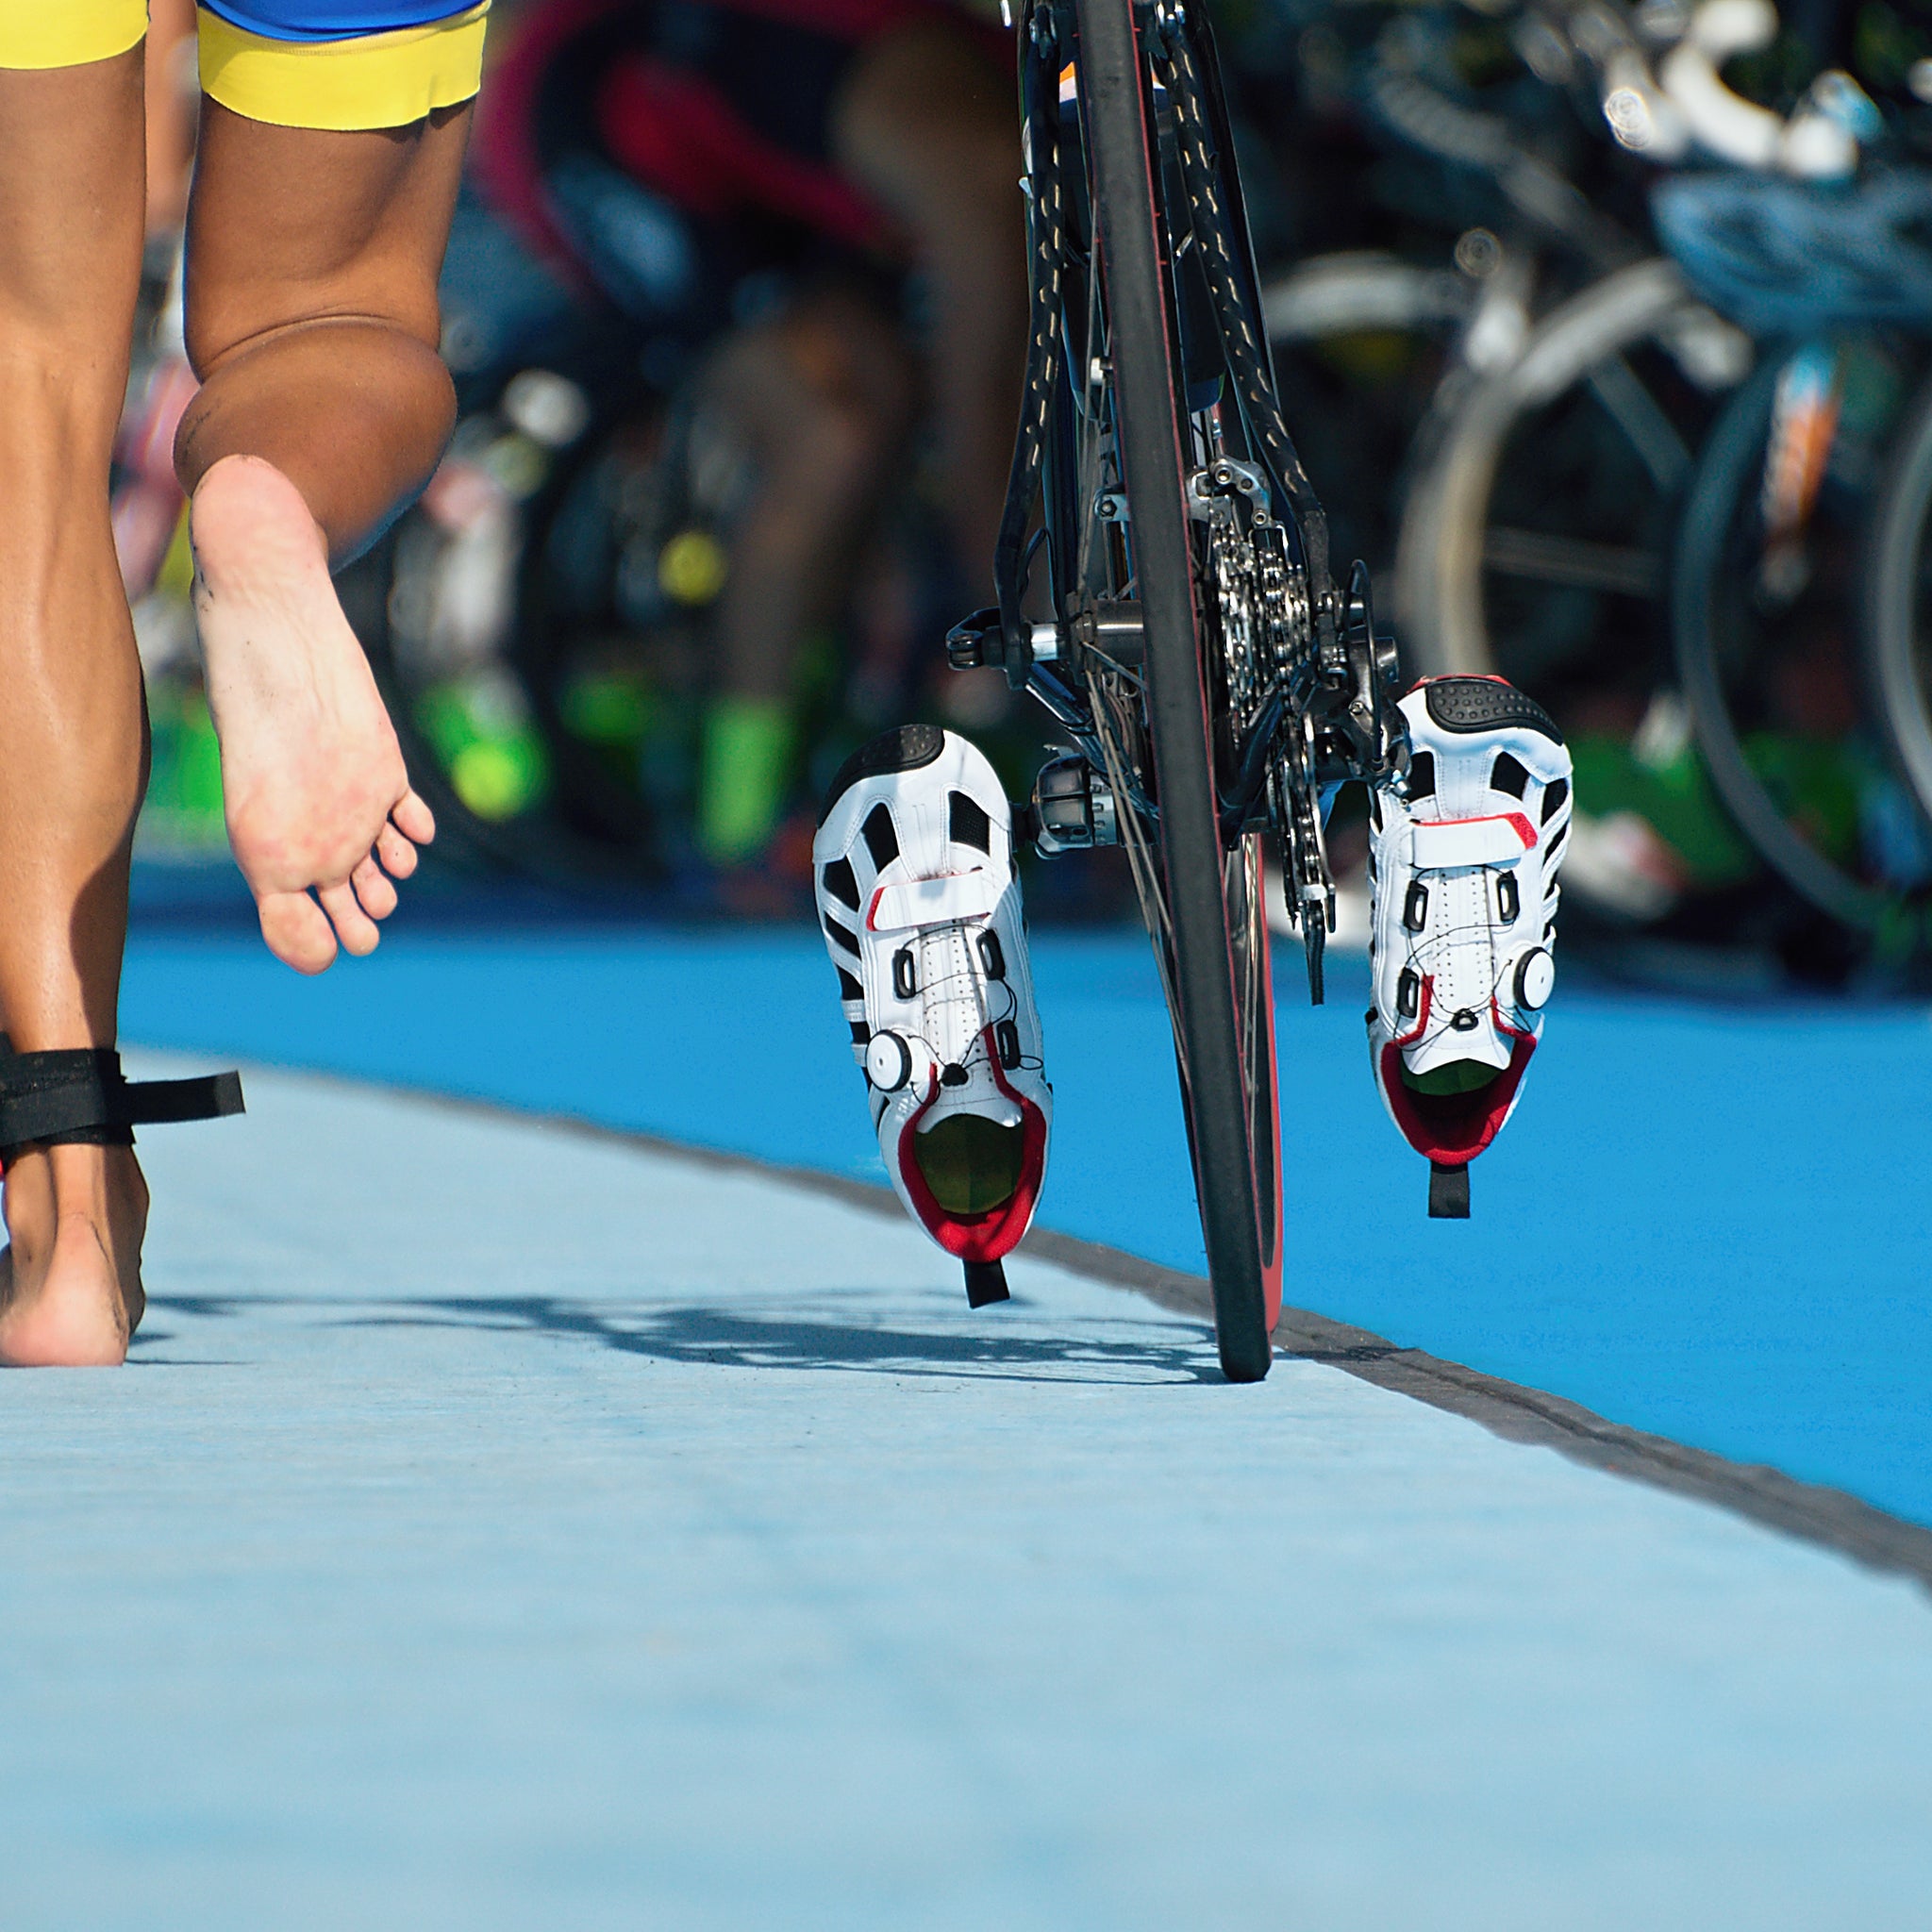 So you want to be a triathlete?